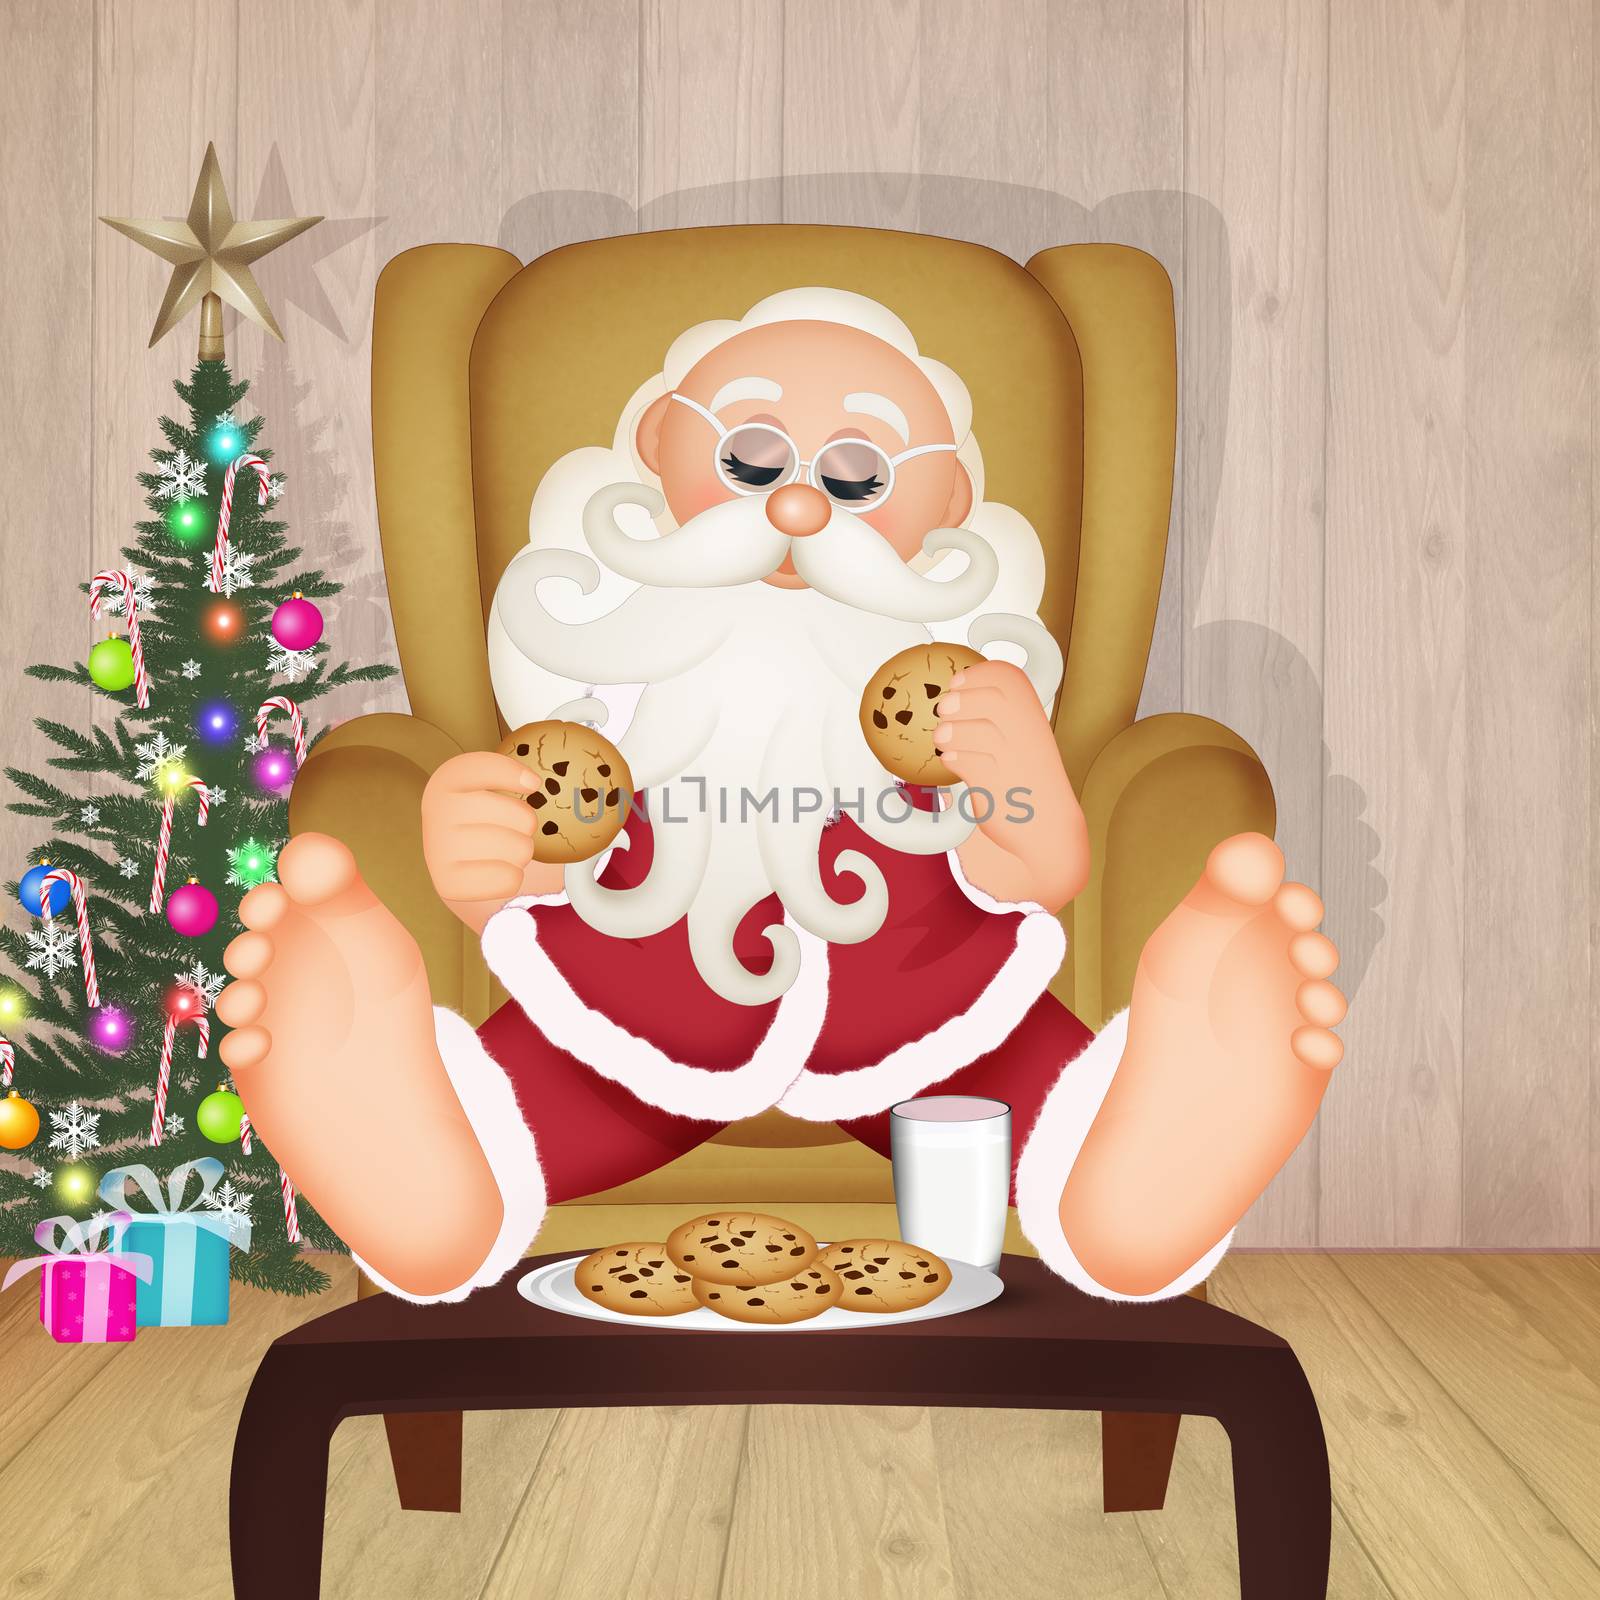 Santa Claus with milk and cookies